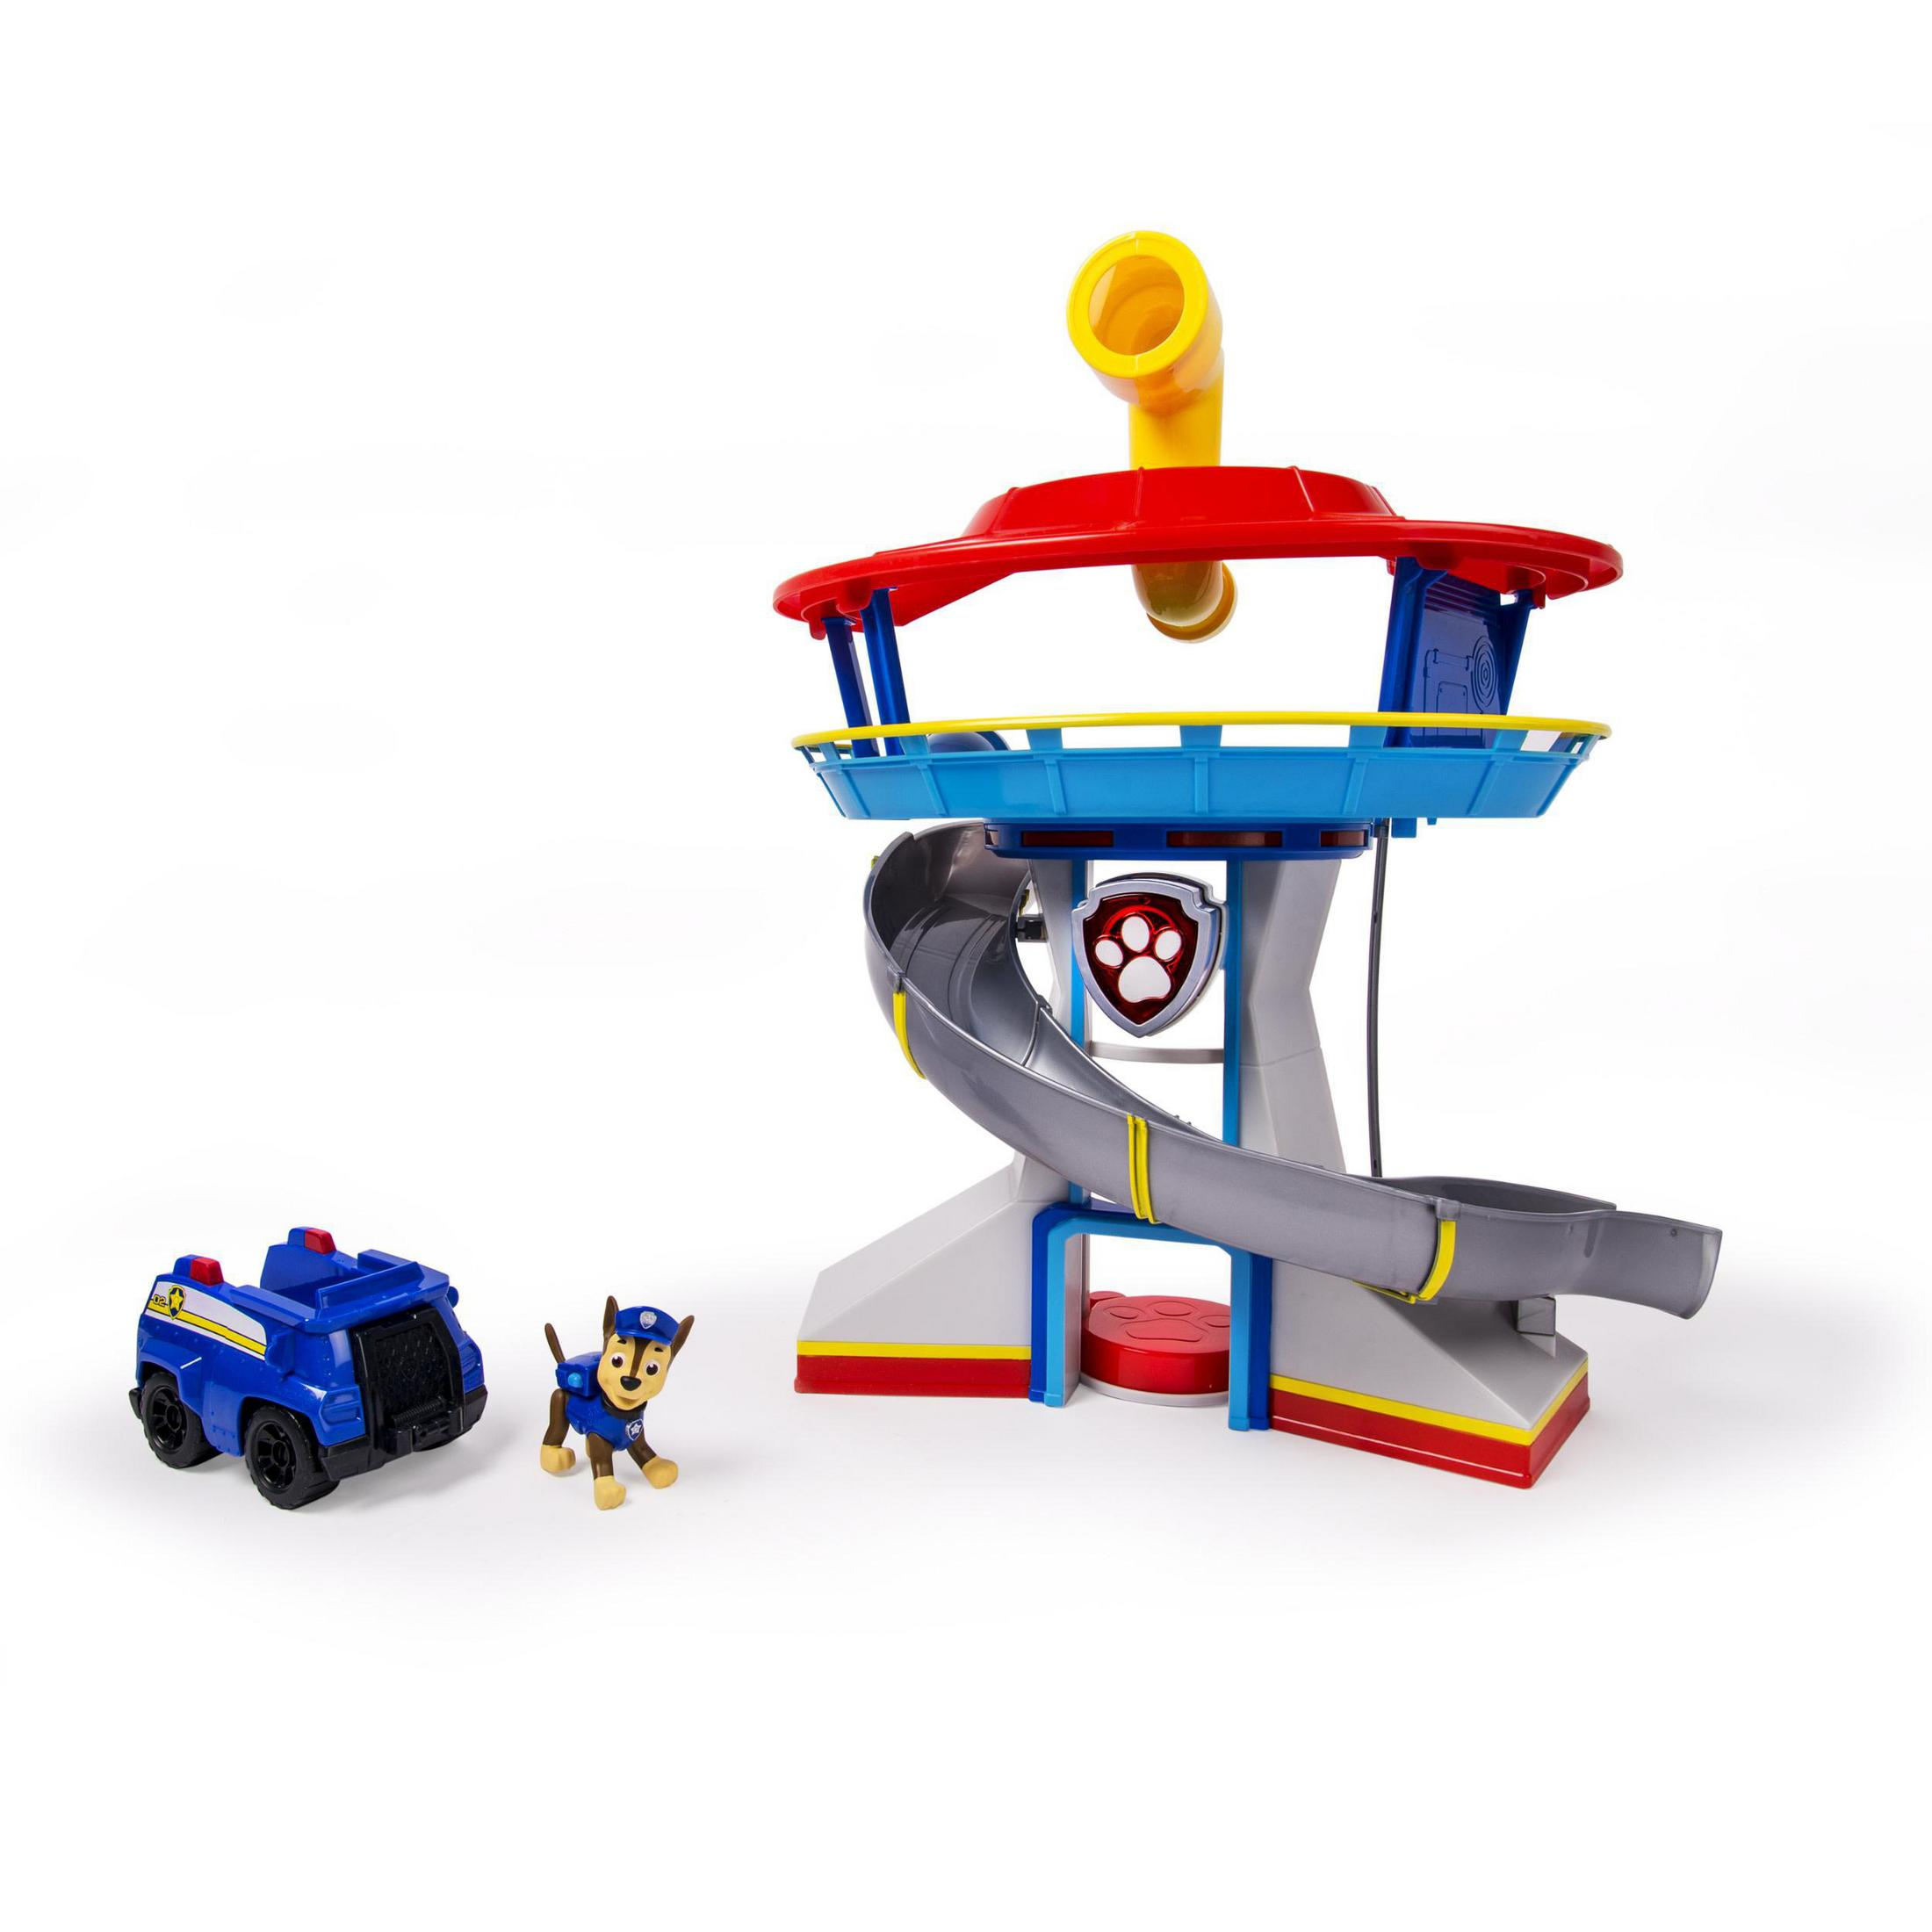 MASTER Spielset PAW LOOKOUT SPIN PLAYSET Mehrfarbig (HEADQUARTER) TOWER 32794